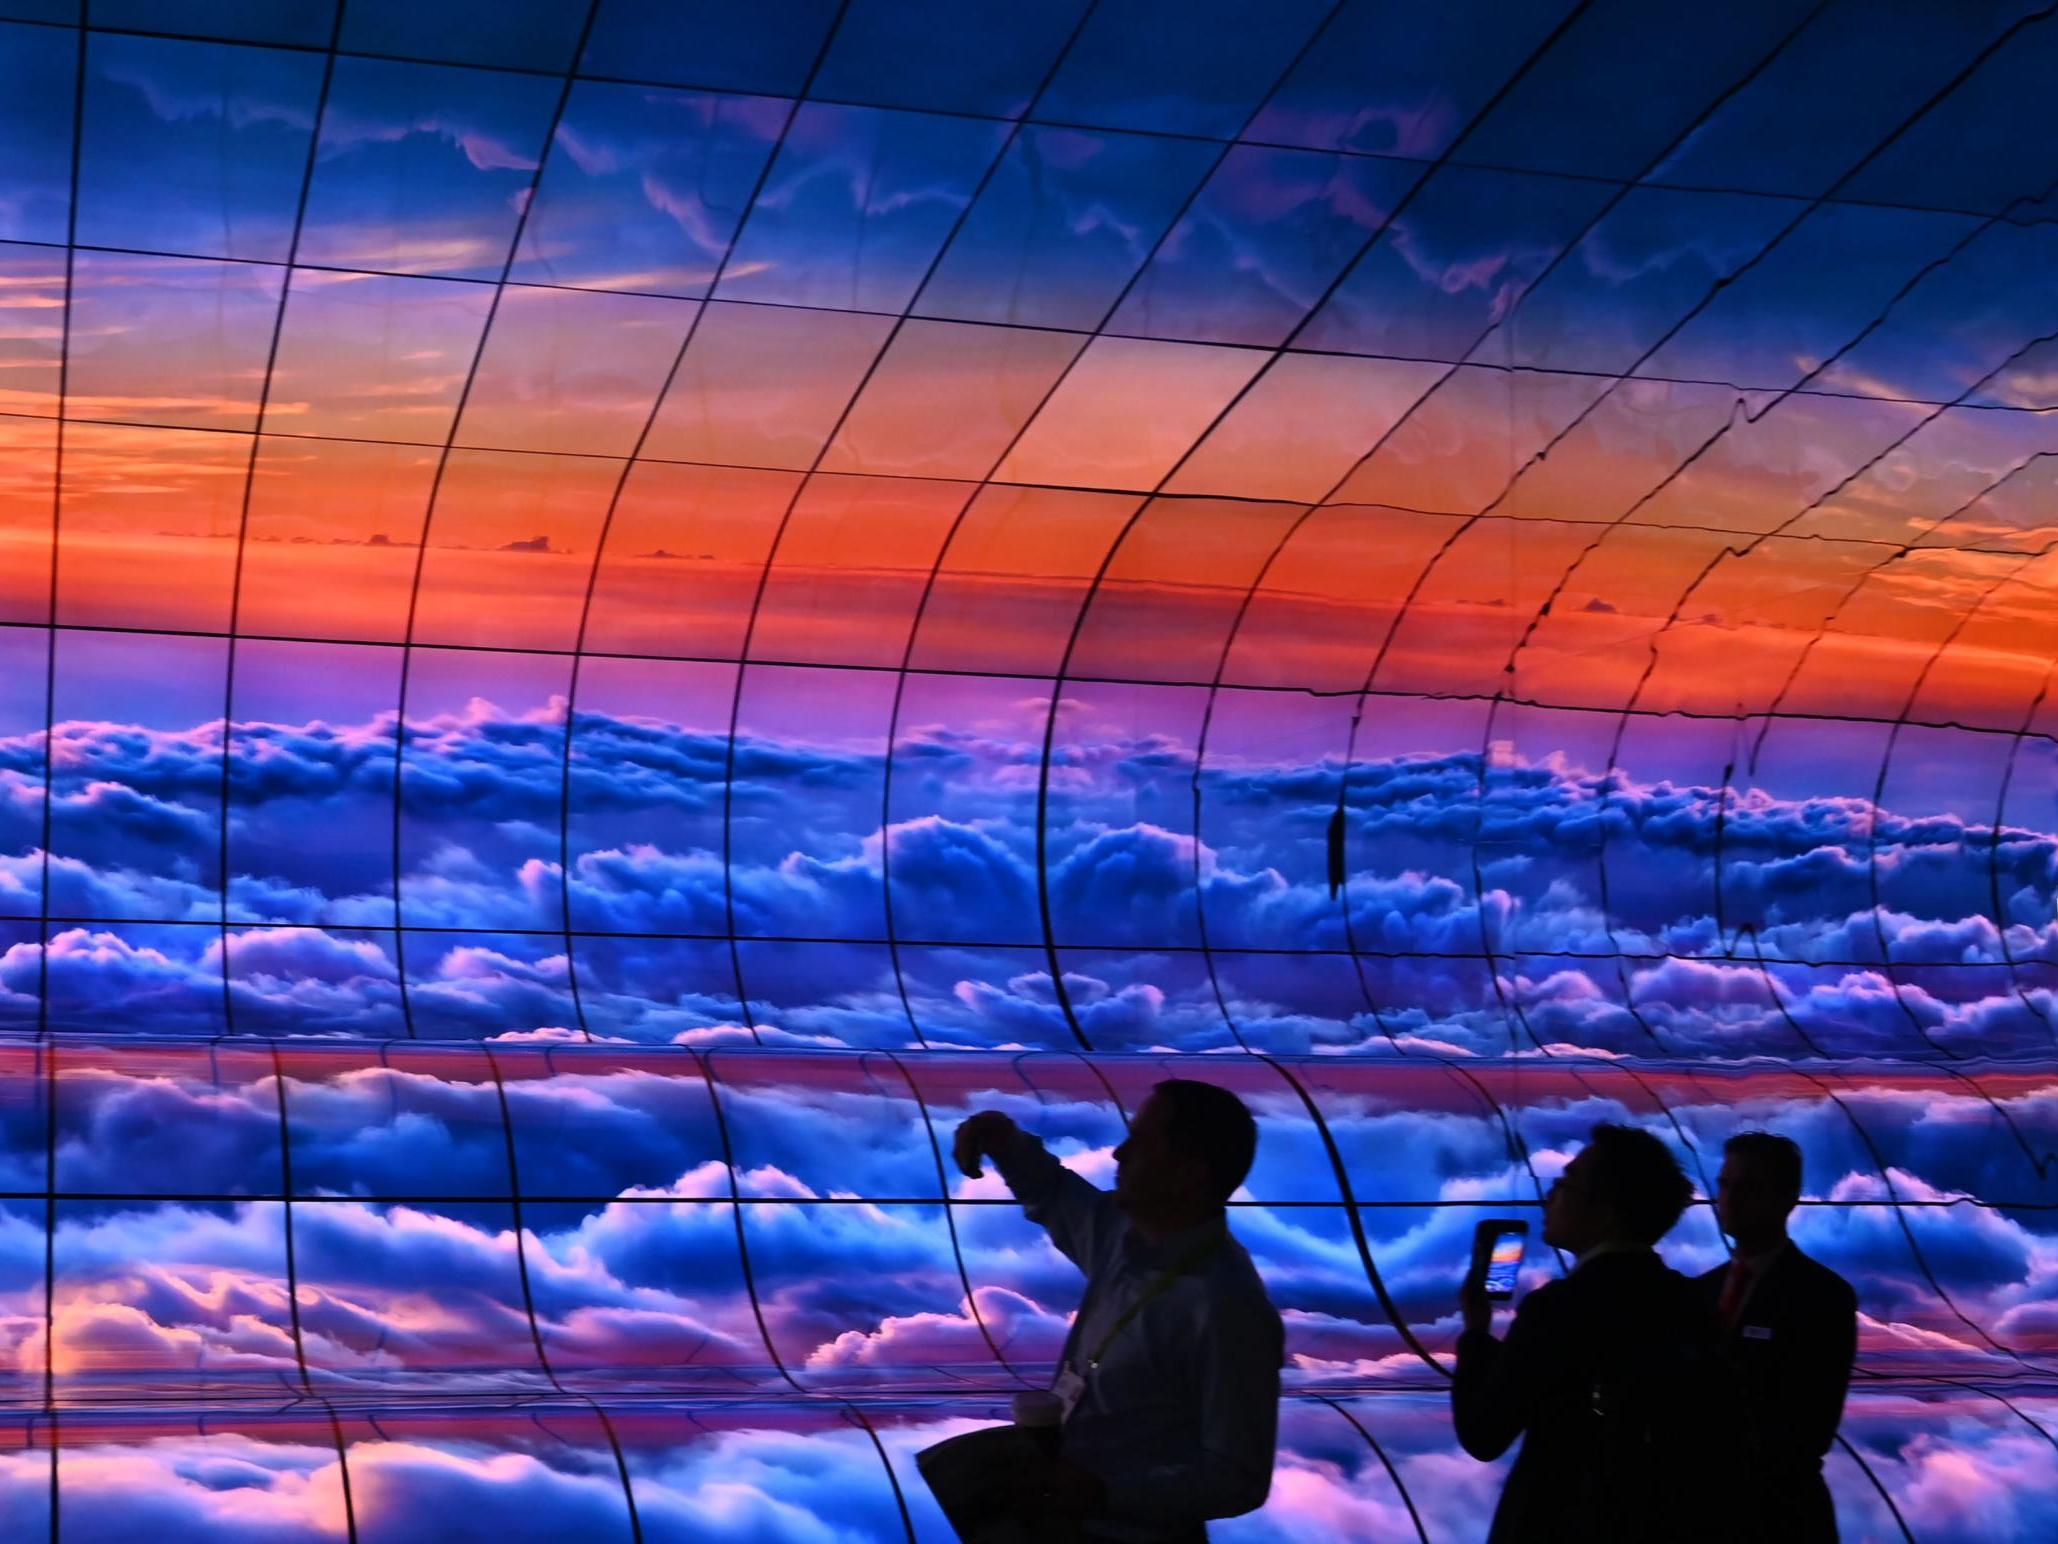 Attendees photograph the "Massive Curve of Nature" display of 250 curved LG OLED televisions on the last day of CES 2019, 11 January 2019 at the Las Vegas Convention Center in Las Vegas, Nevada